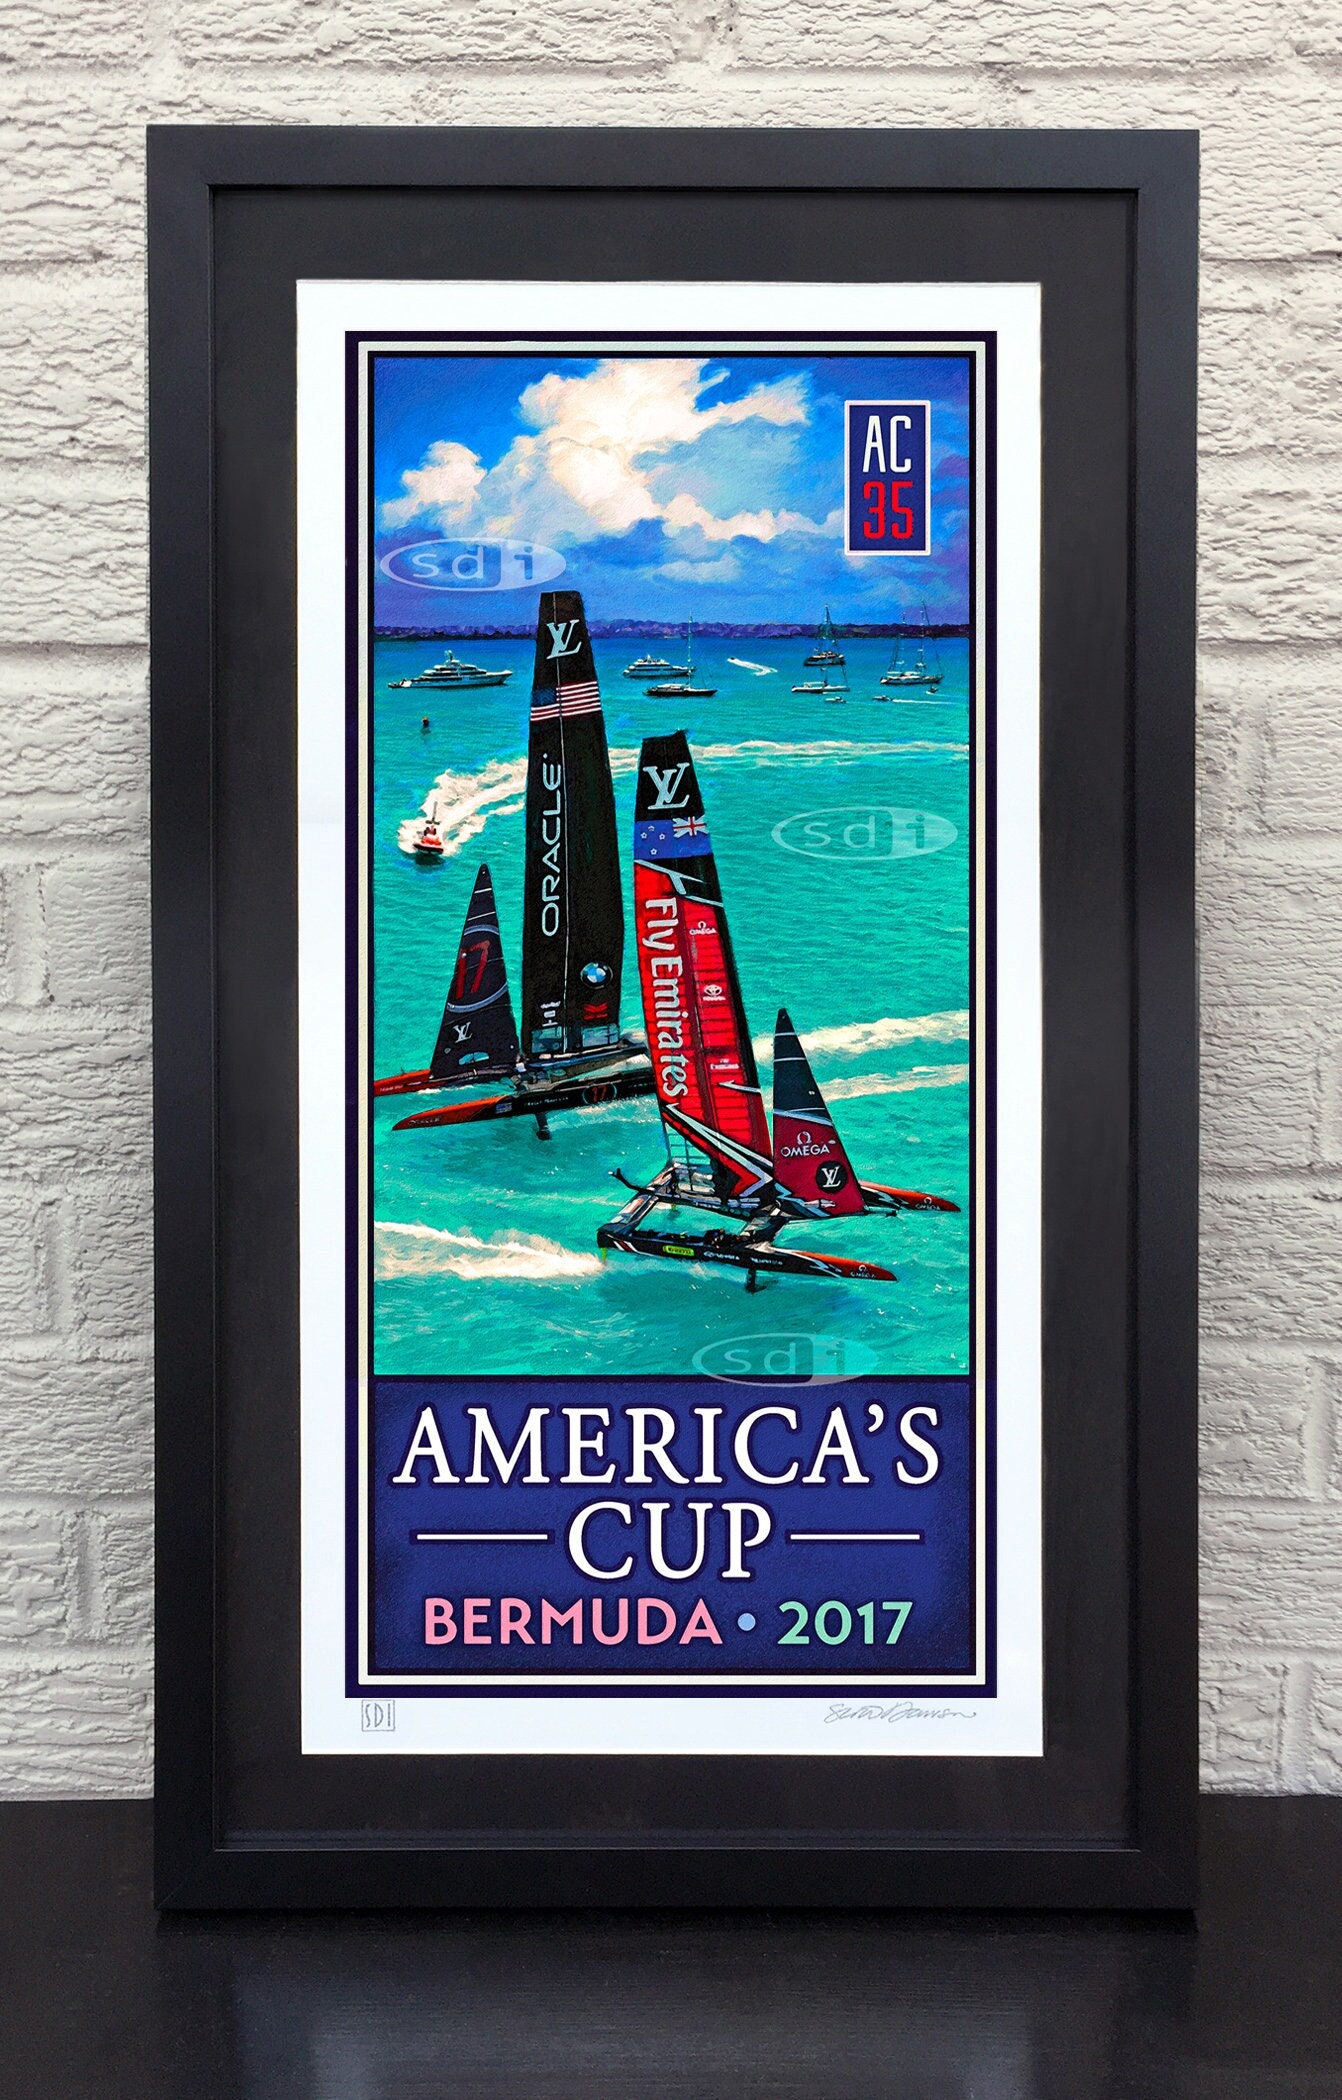 36th America's Cup  Poster for Sale by azvaaulia